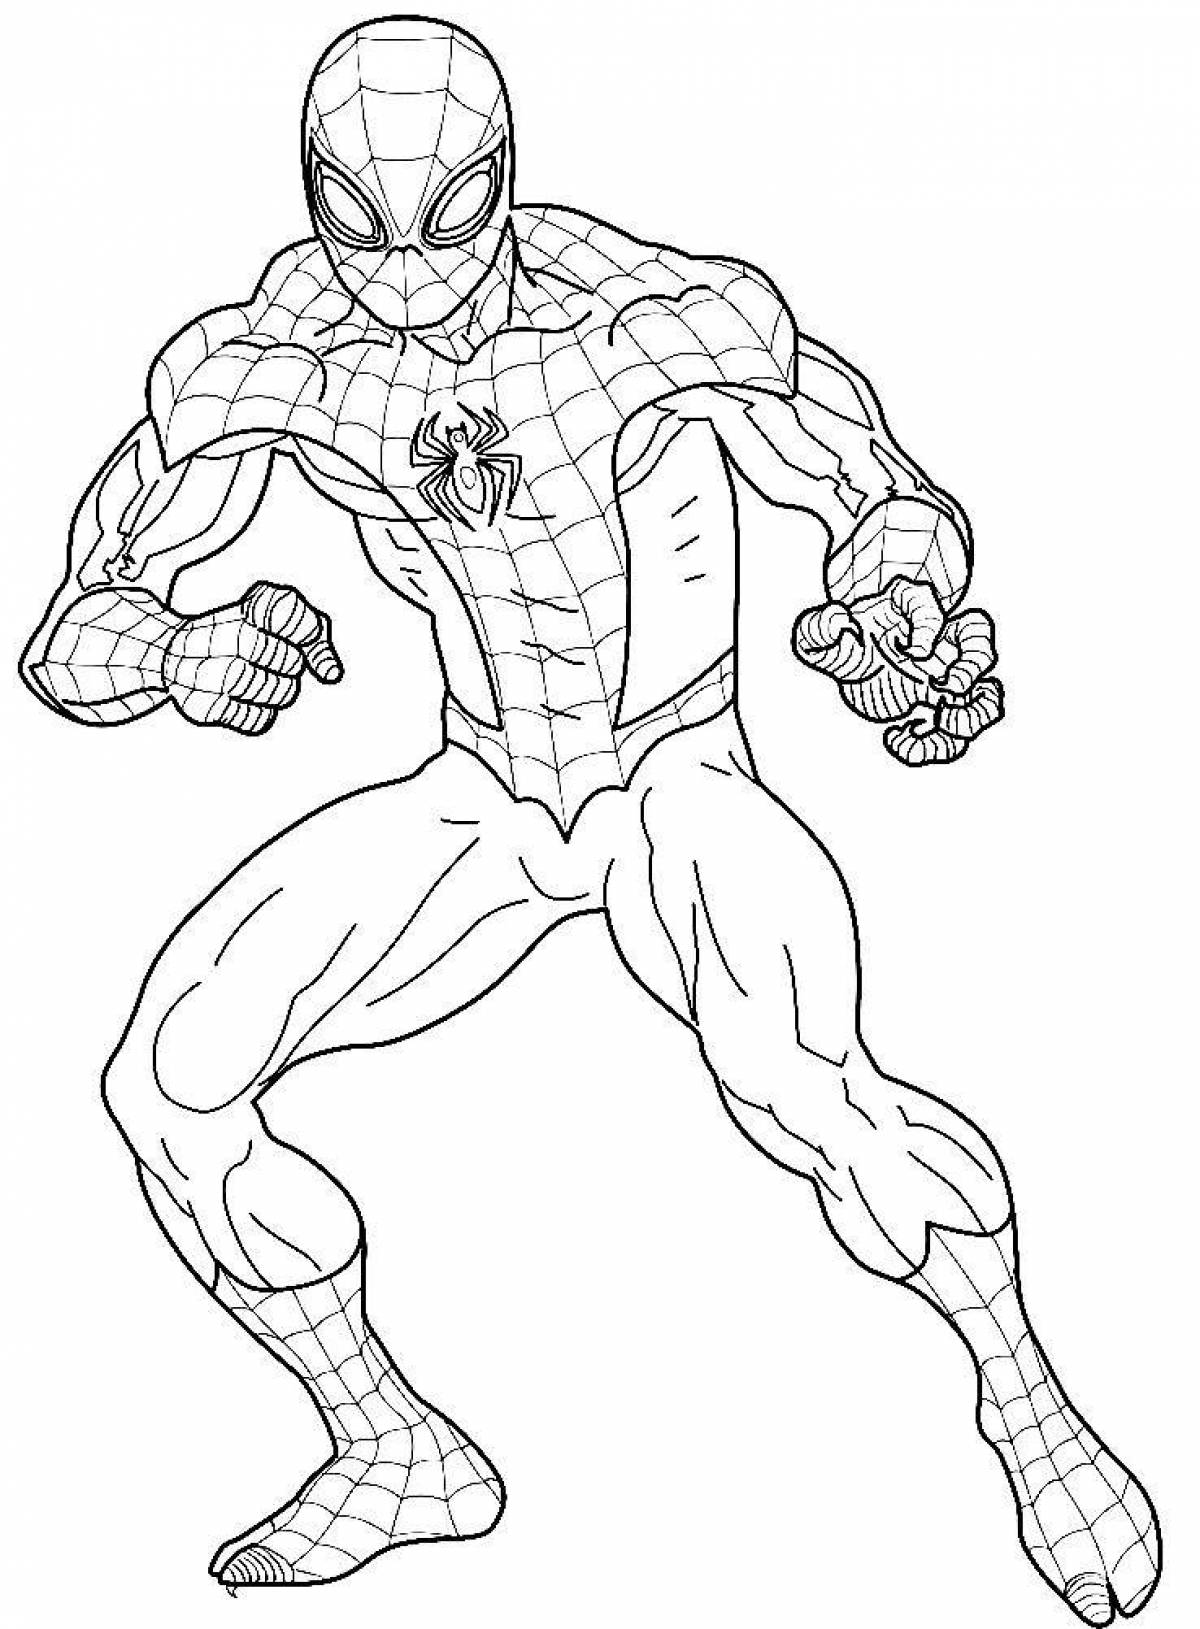 Gracious spiderman coloring pages